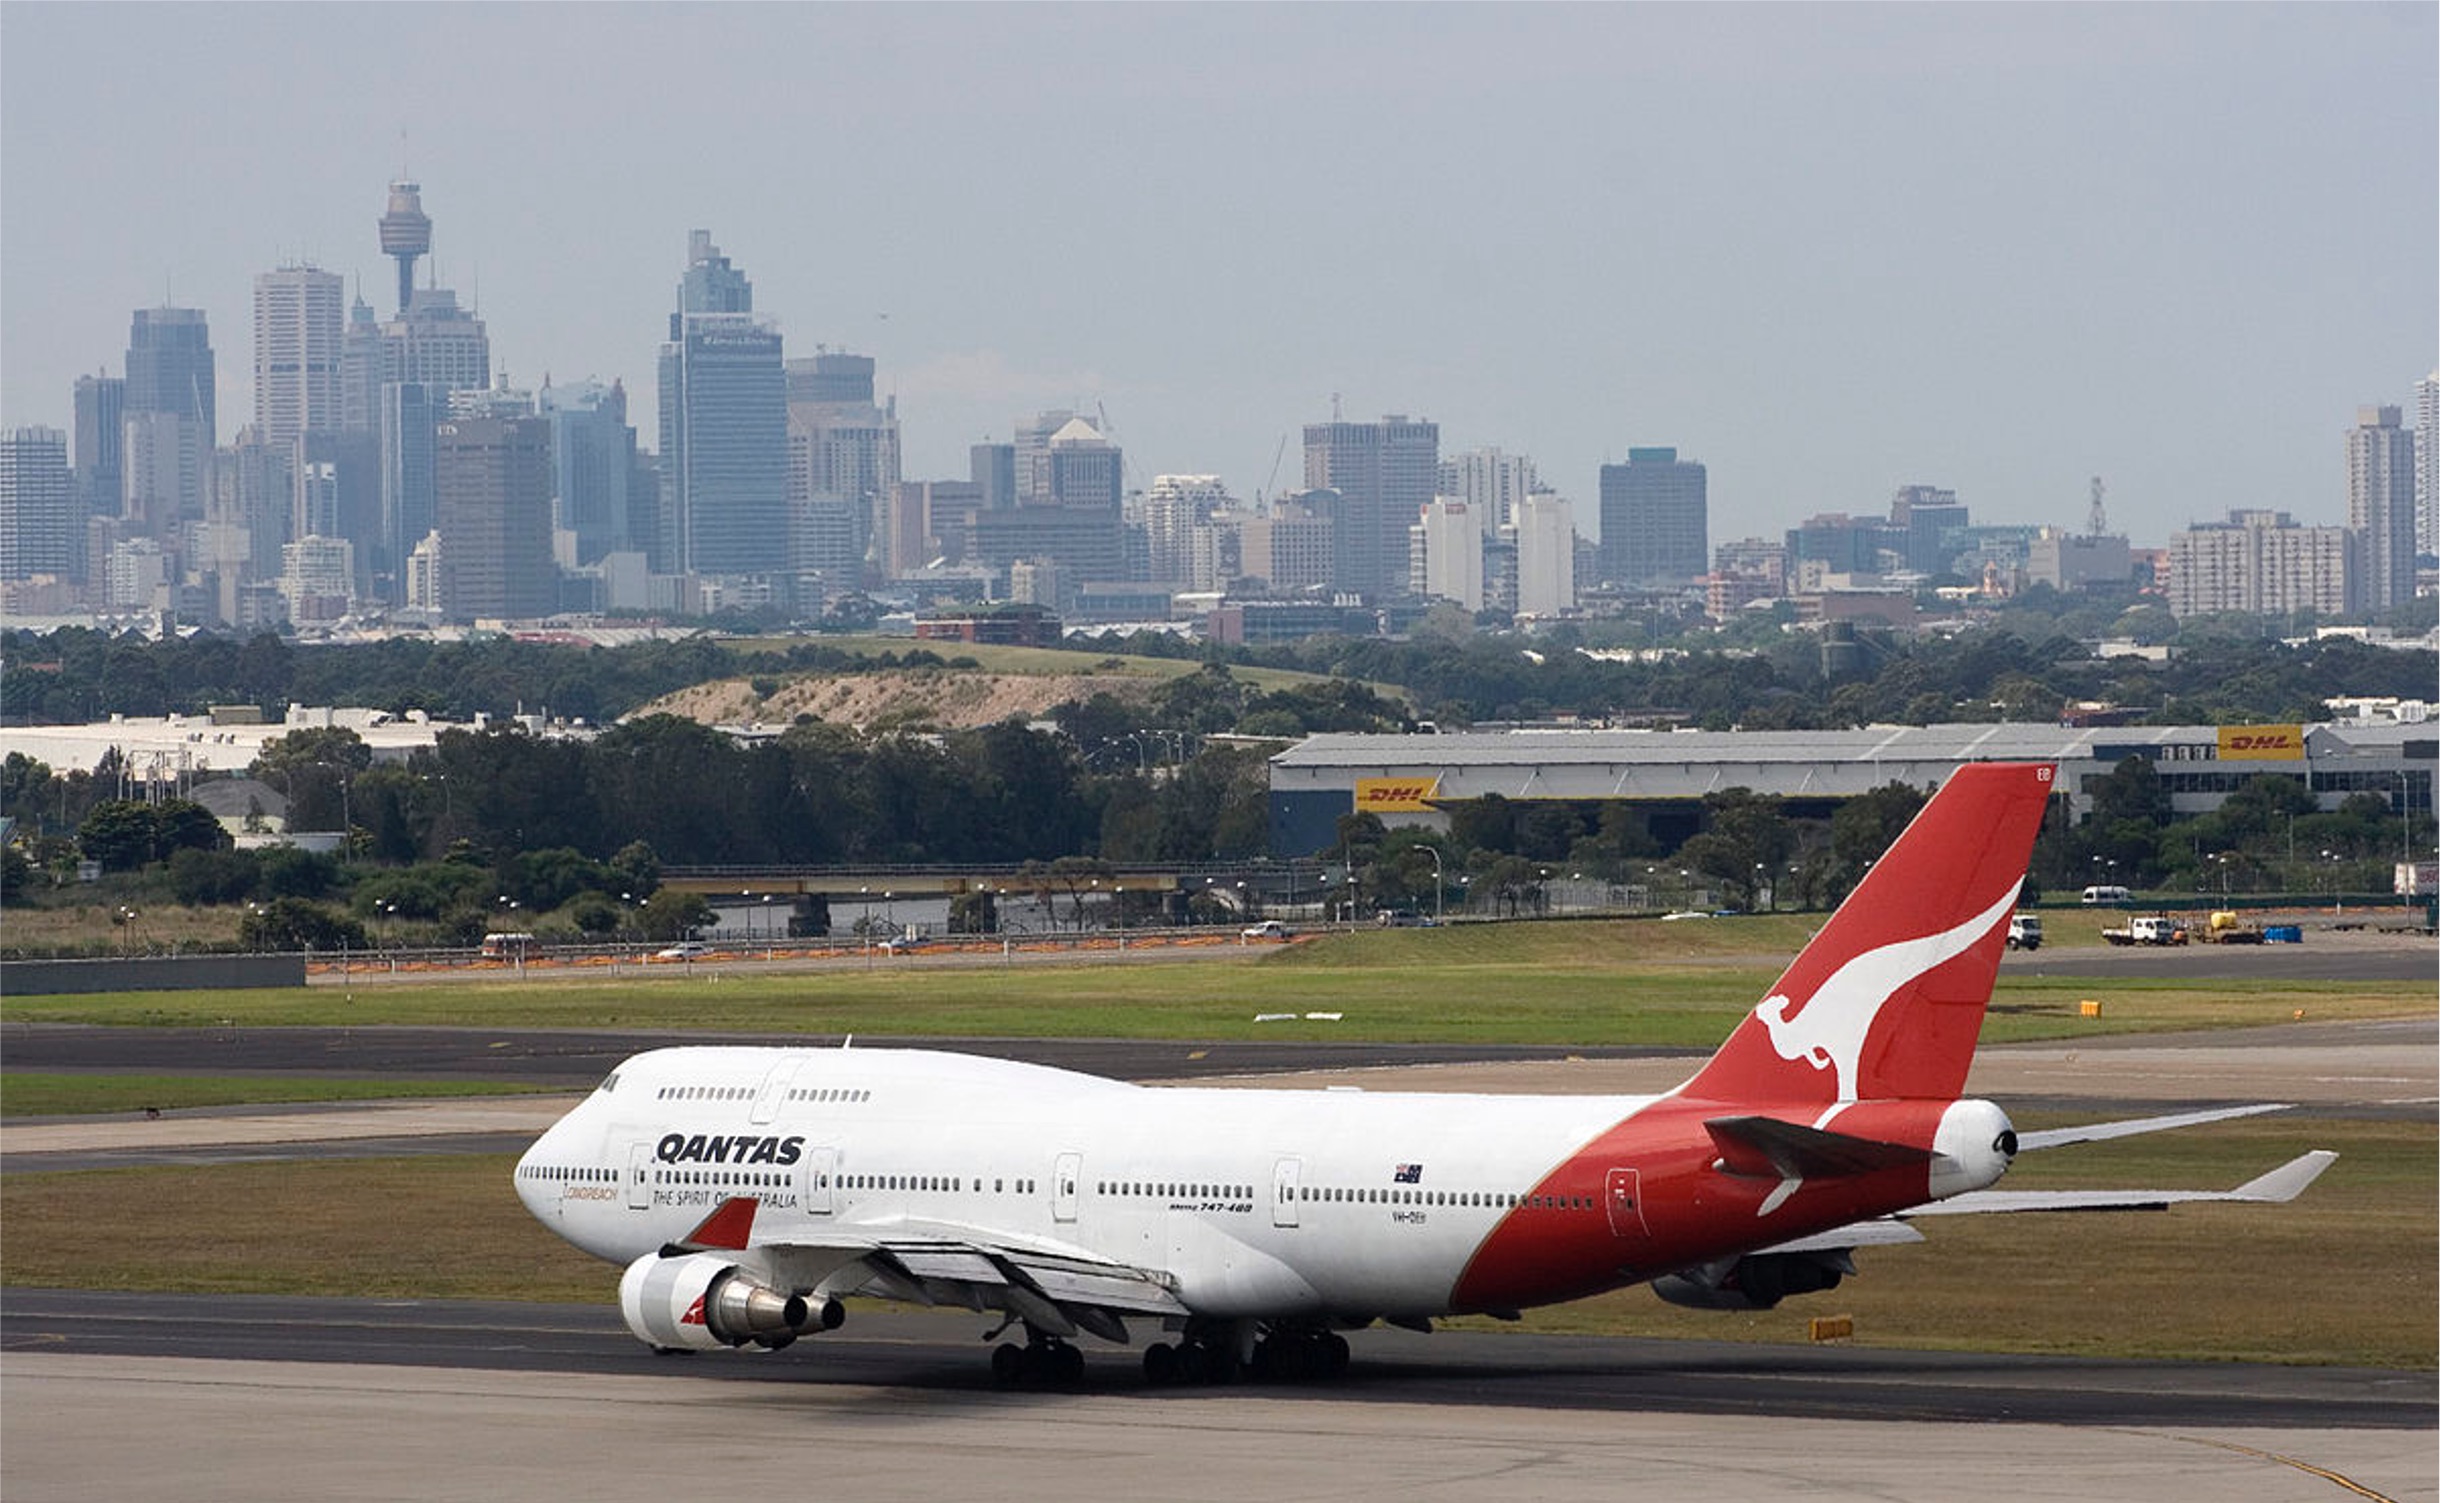 Incredible scenes as Qantas flight lands on-time, intact